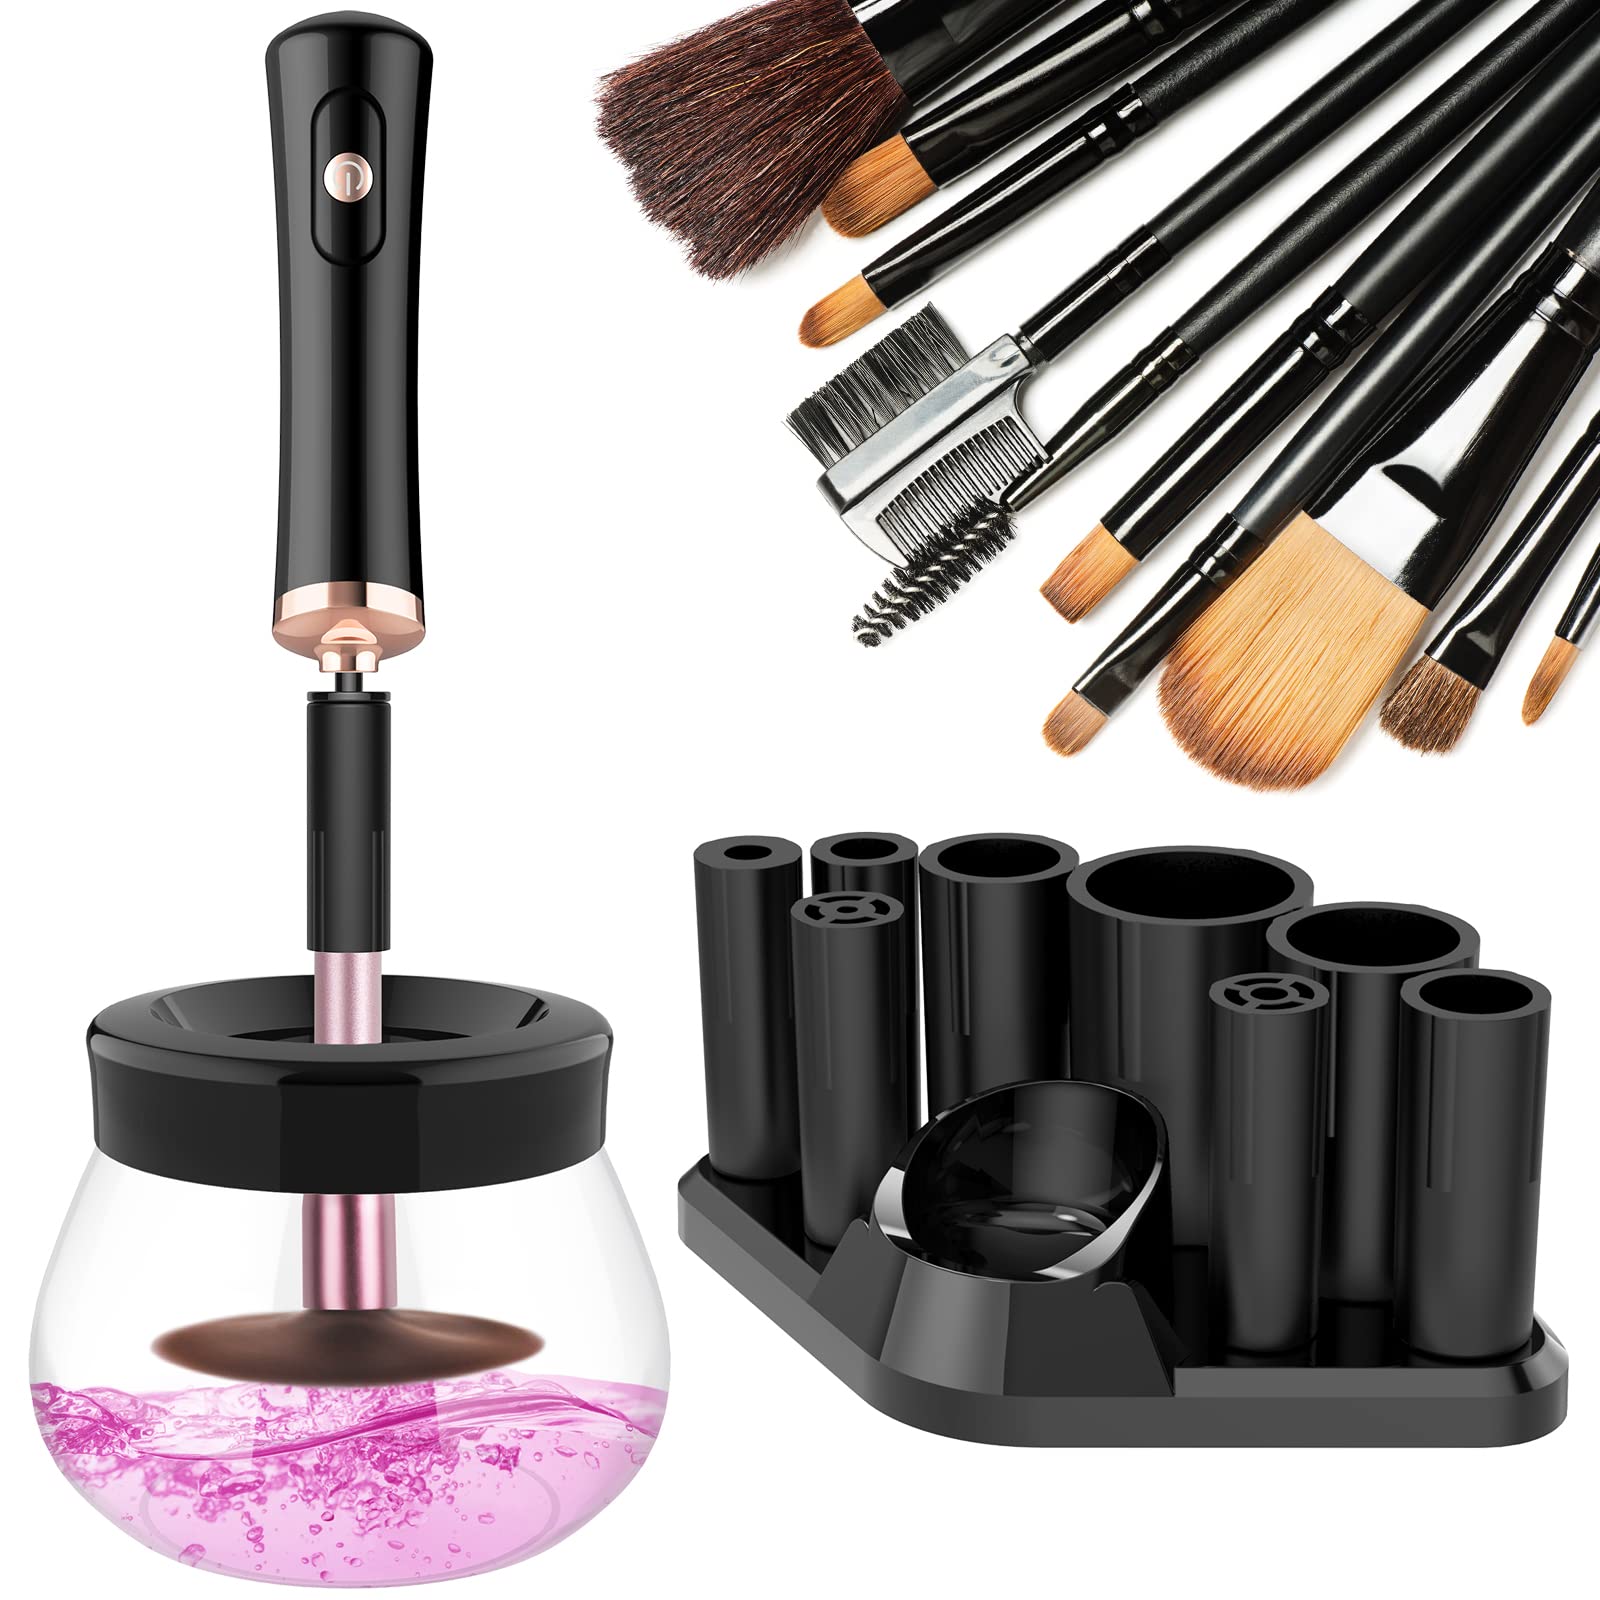 Makeup Brush Cleaner Dryer, Automatic Brush Spinner with 8 Size